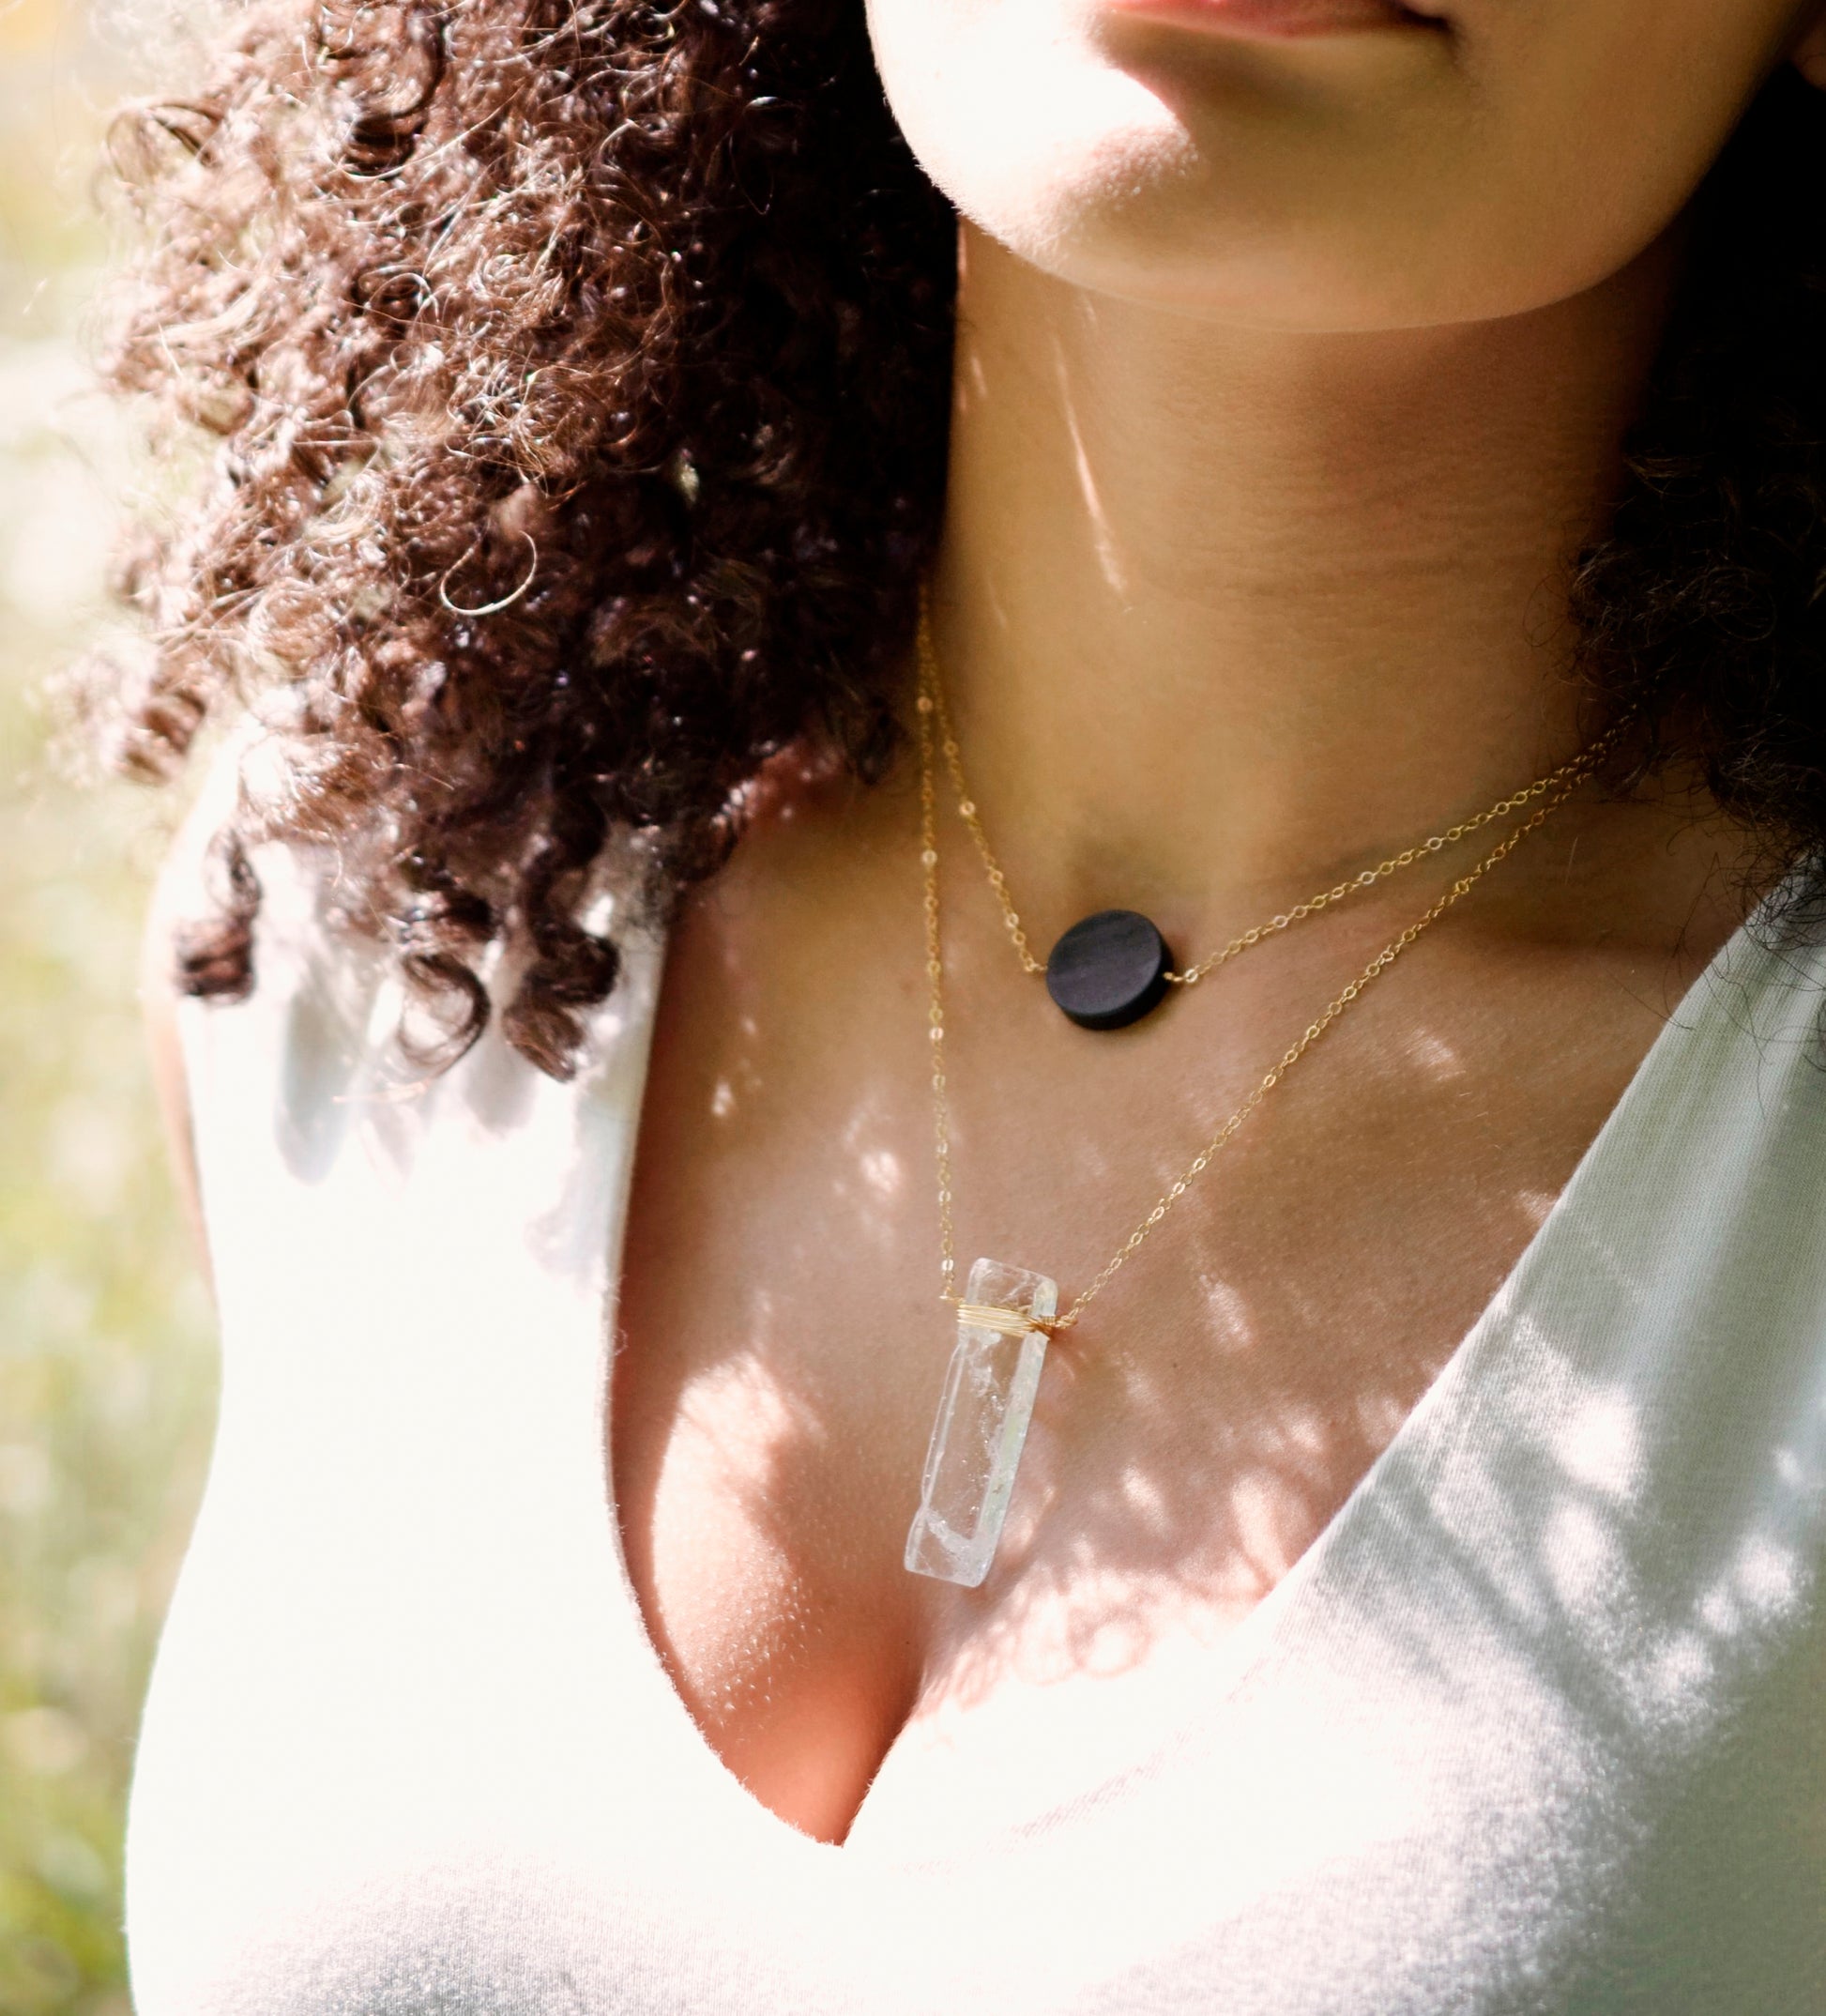 Rectangular shaped natural clear crystal Quartz gemstone set into a 14k gold filled chain. Modeled image. Shown with a black Onyx pendant.